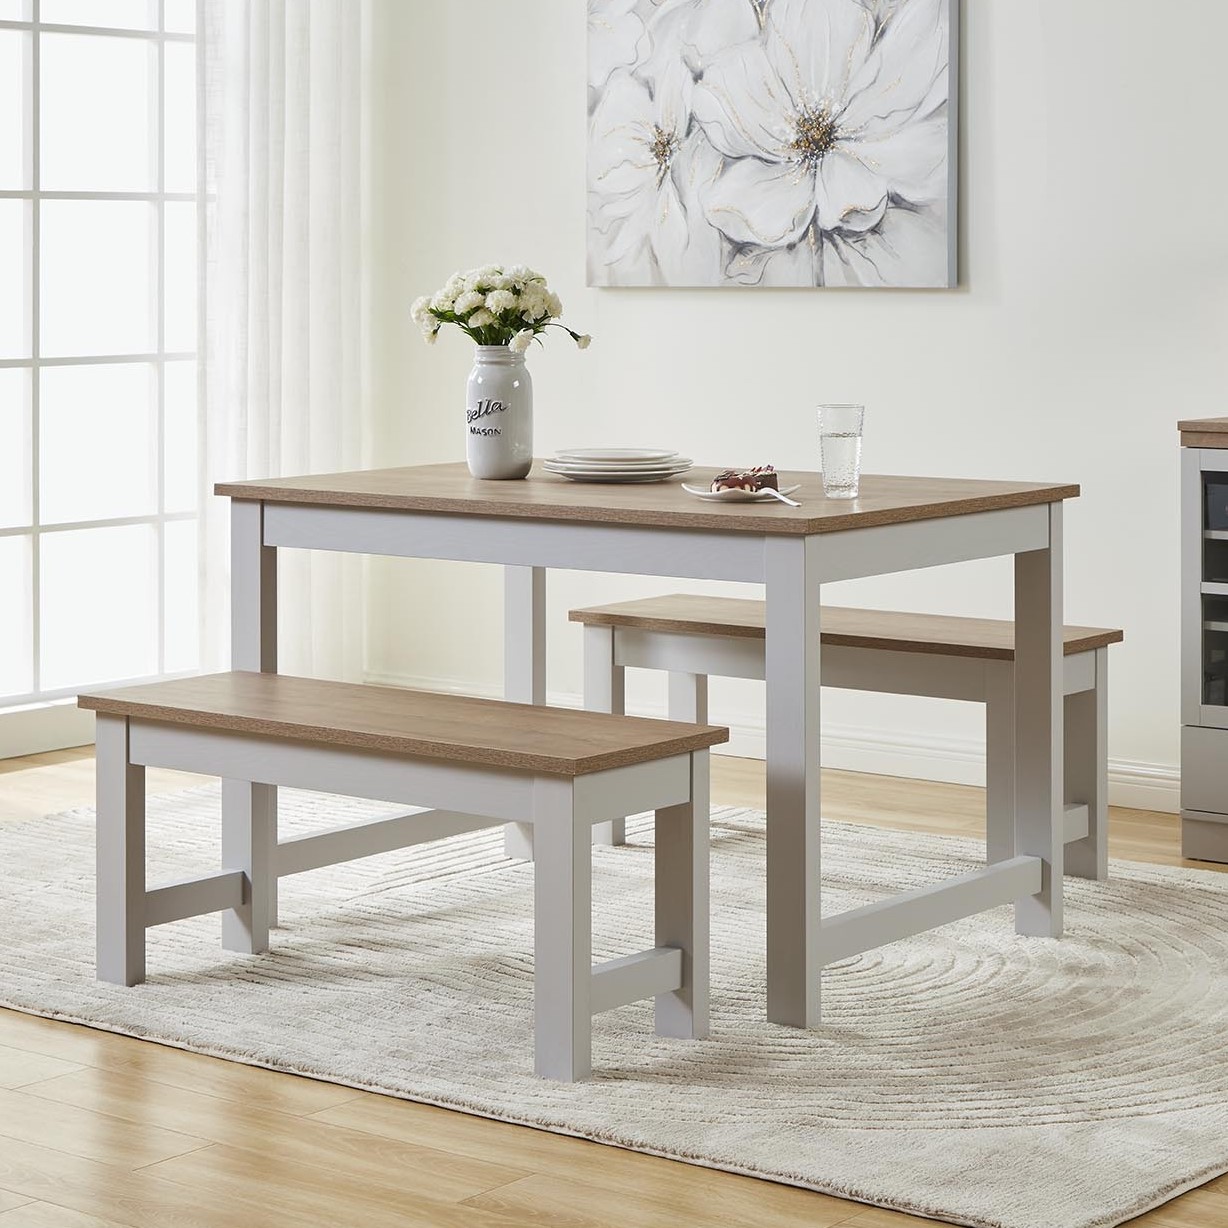 Cambridge Wooden 4 Seater Dining Set Oak Effect and Light Grey Image 1